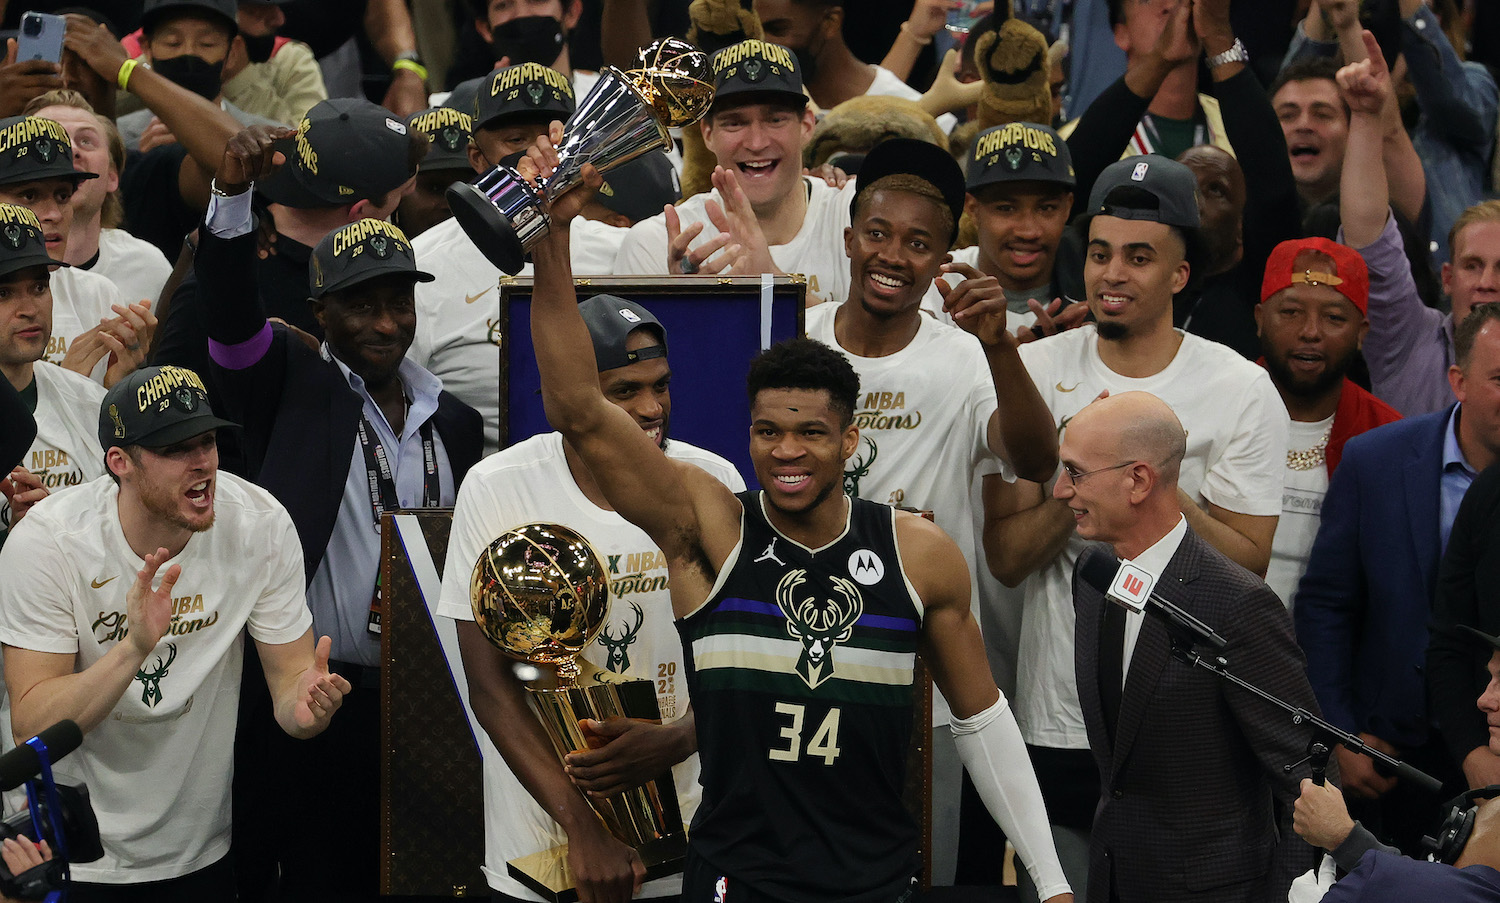 MILWAUKEE, WISCONSIN - JULY 20: Giannis Antetokounmpo #34 of the Milwaukee Bucks celebrates winning the Bill Russell NBA Finals MVP Award after defeating the Phoenix Suns in Game Six to win the 2021 NBA Finals at Fiserv Forum on July 20, 2021 in Milwaukee, Wisconsin. NOTE TO USER: User expressly acknowledges and agrees that, by downloading and or using this photograph, User is consenting to the terms and conditions of the Getty Images License Agreement. (Photo by Jonathan Daniel/Getty Images)